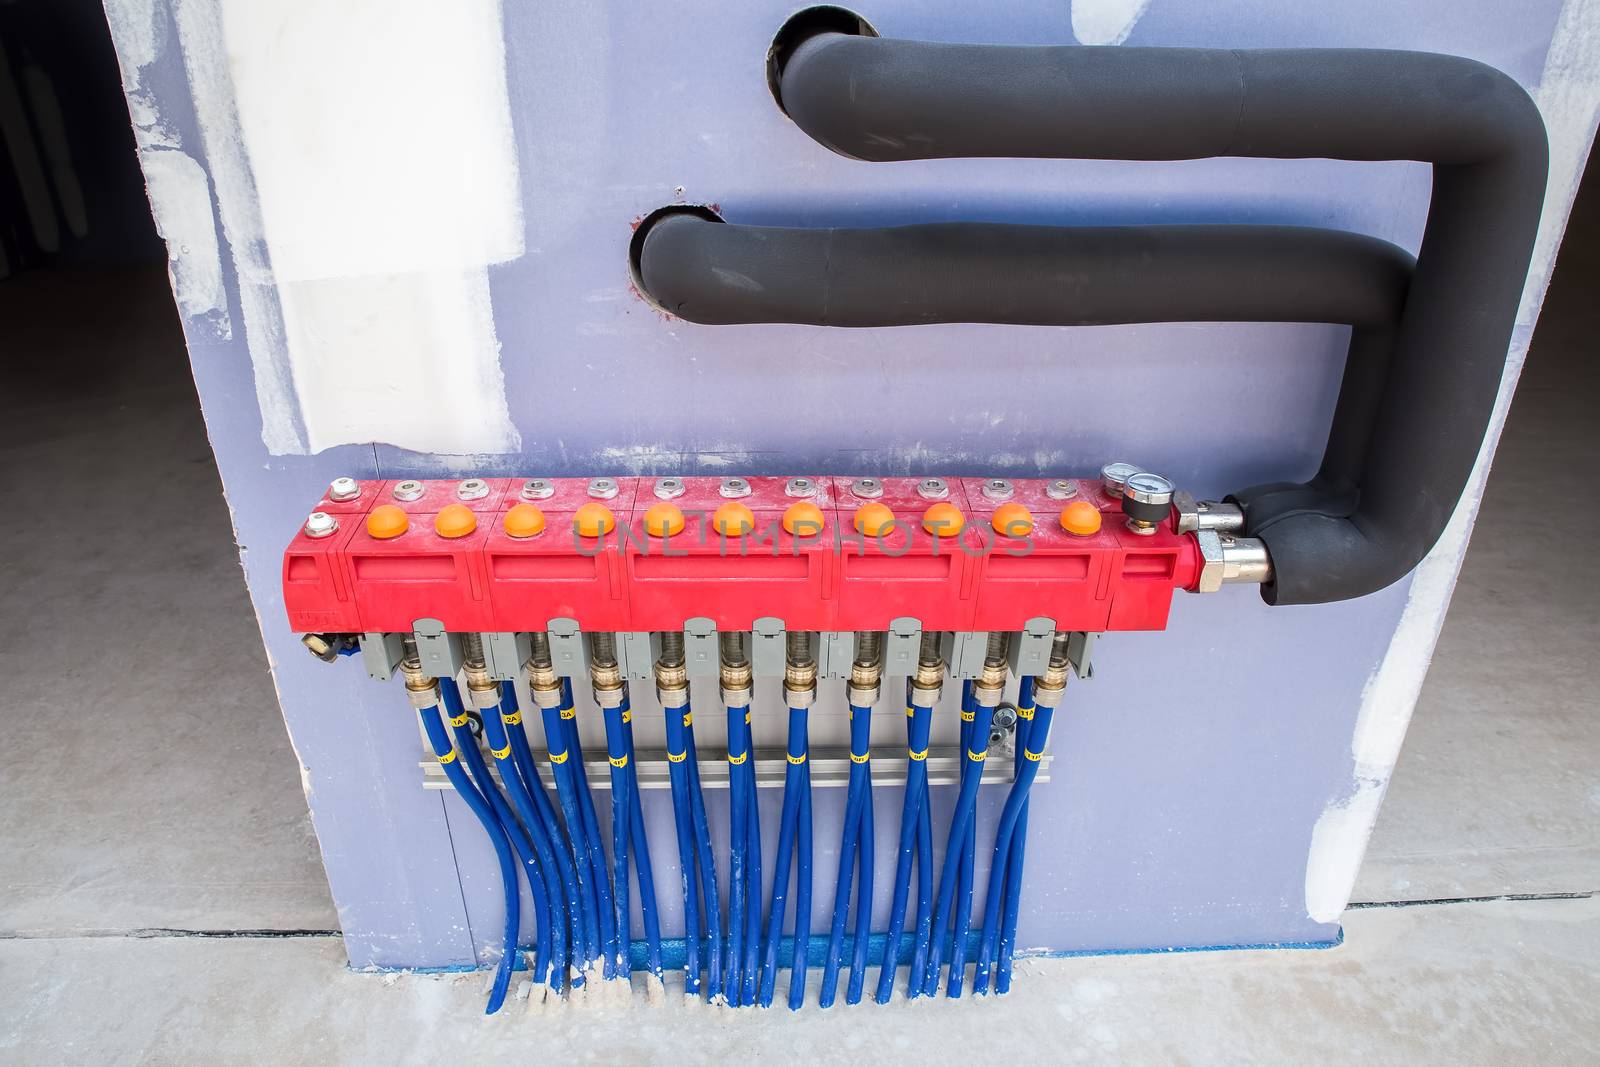 Construction with blue pipes for underfloor heating